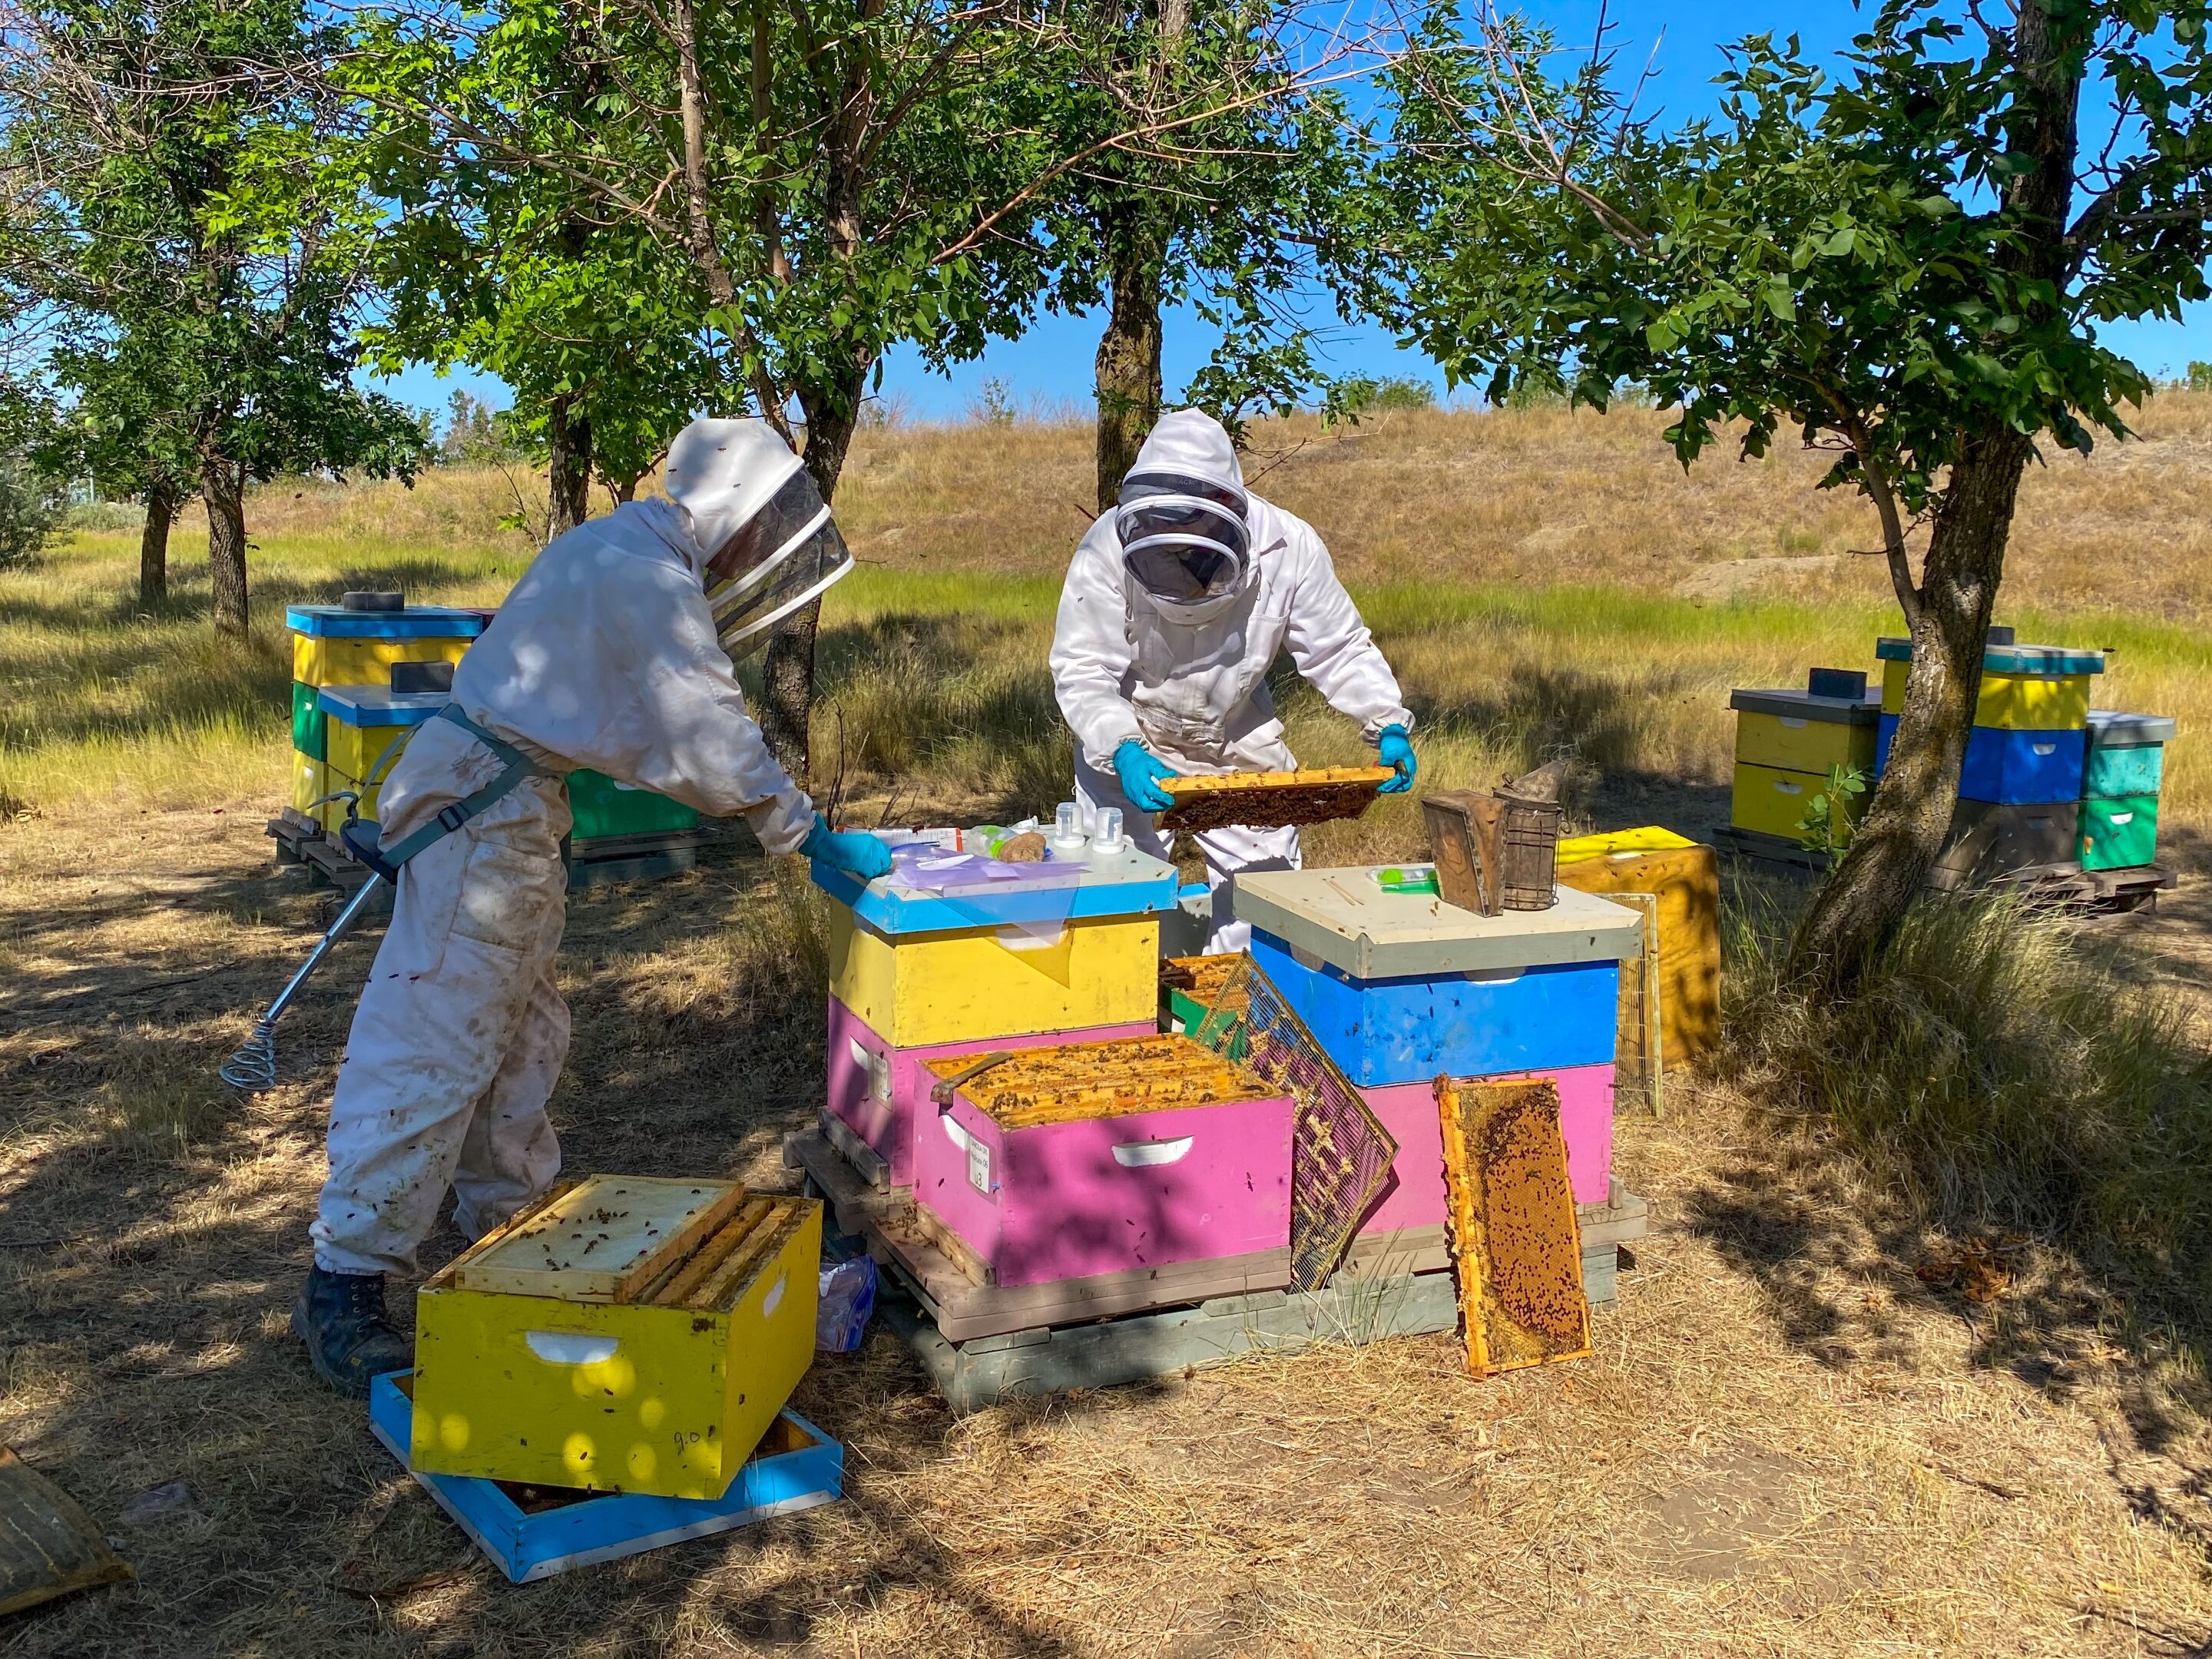 Honey bees experience multiple health stressors out in the field